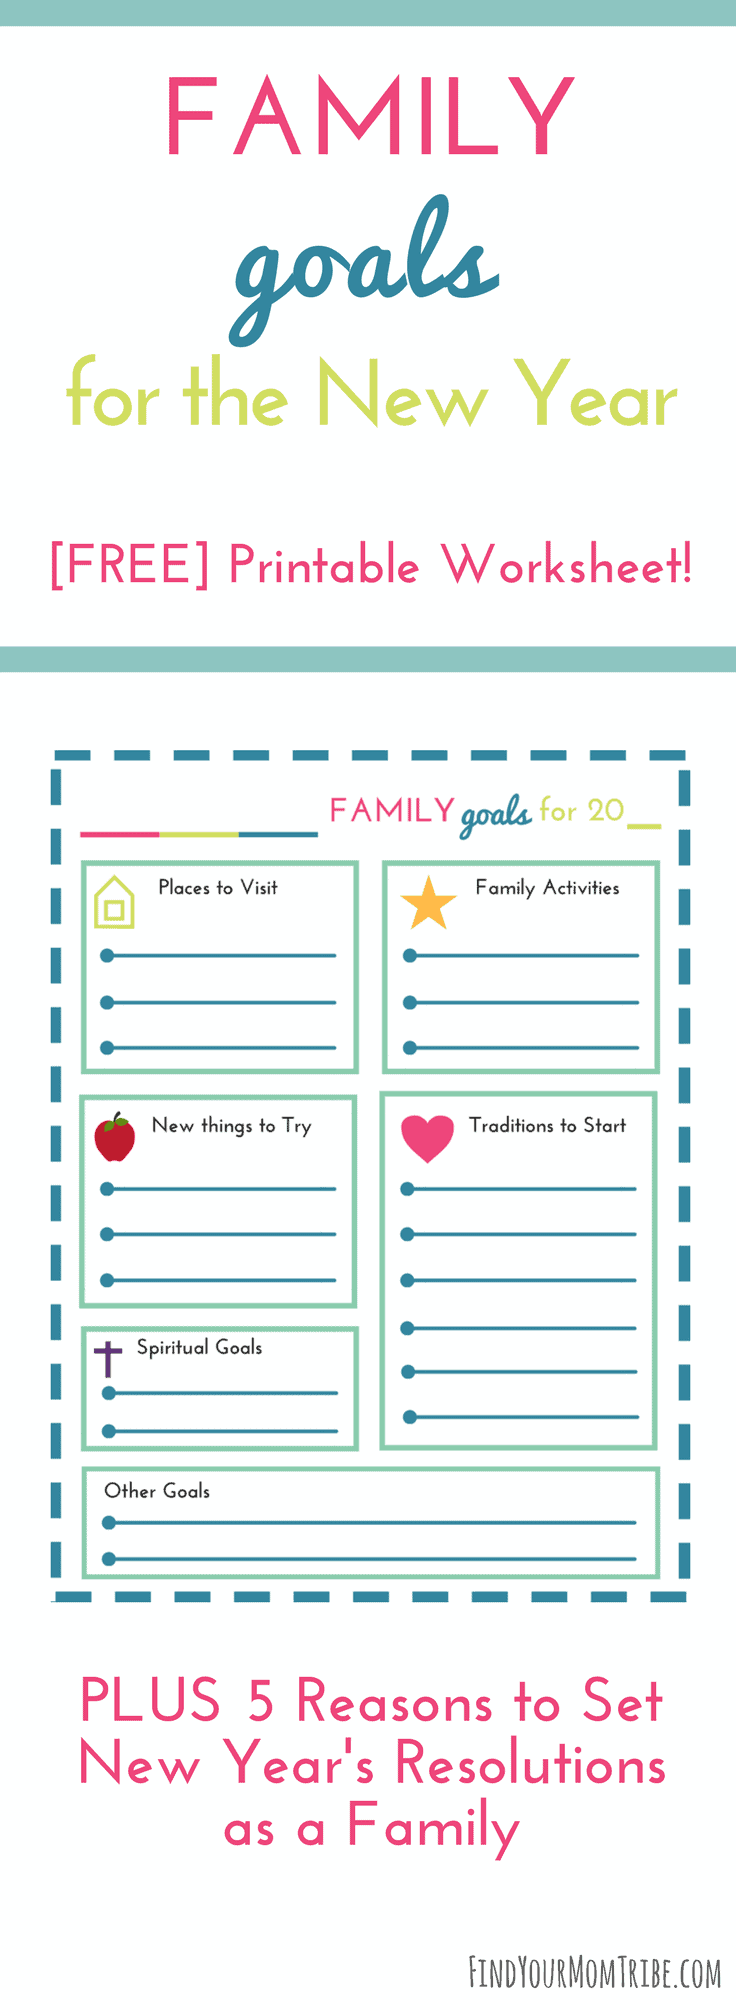 5 Reasons to Set New Year's Resolutions as a family - PLUS free printable New Year's worksheet! #goalsetting #NewYears #FreePrintables #NewYearsWorksheet #NewYearsResolutions #NewYearsPlanner #FamilyGoals #2018 #NewYears2018